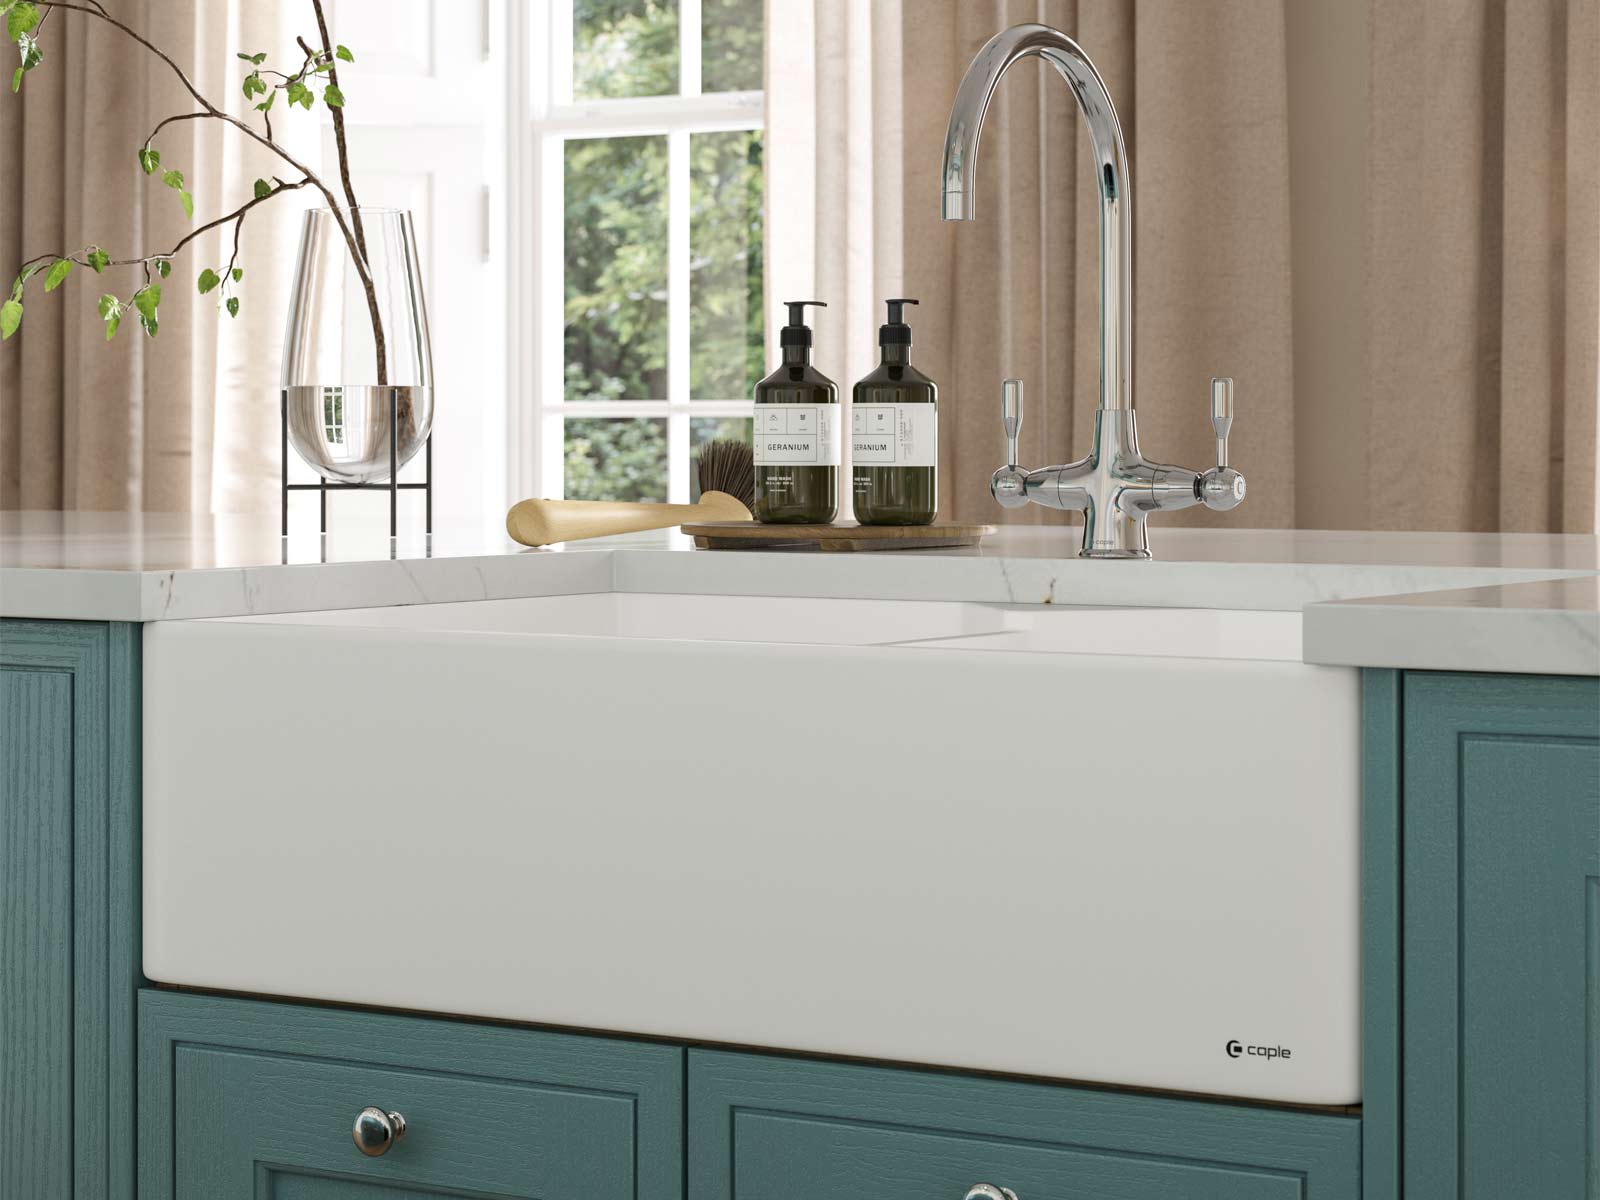 A turquoise kitchen’s white sink that complements green kitchen ideas and blue kitchen ideas